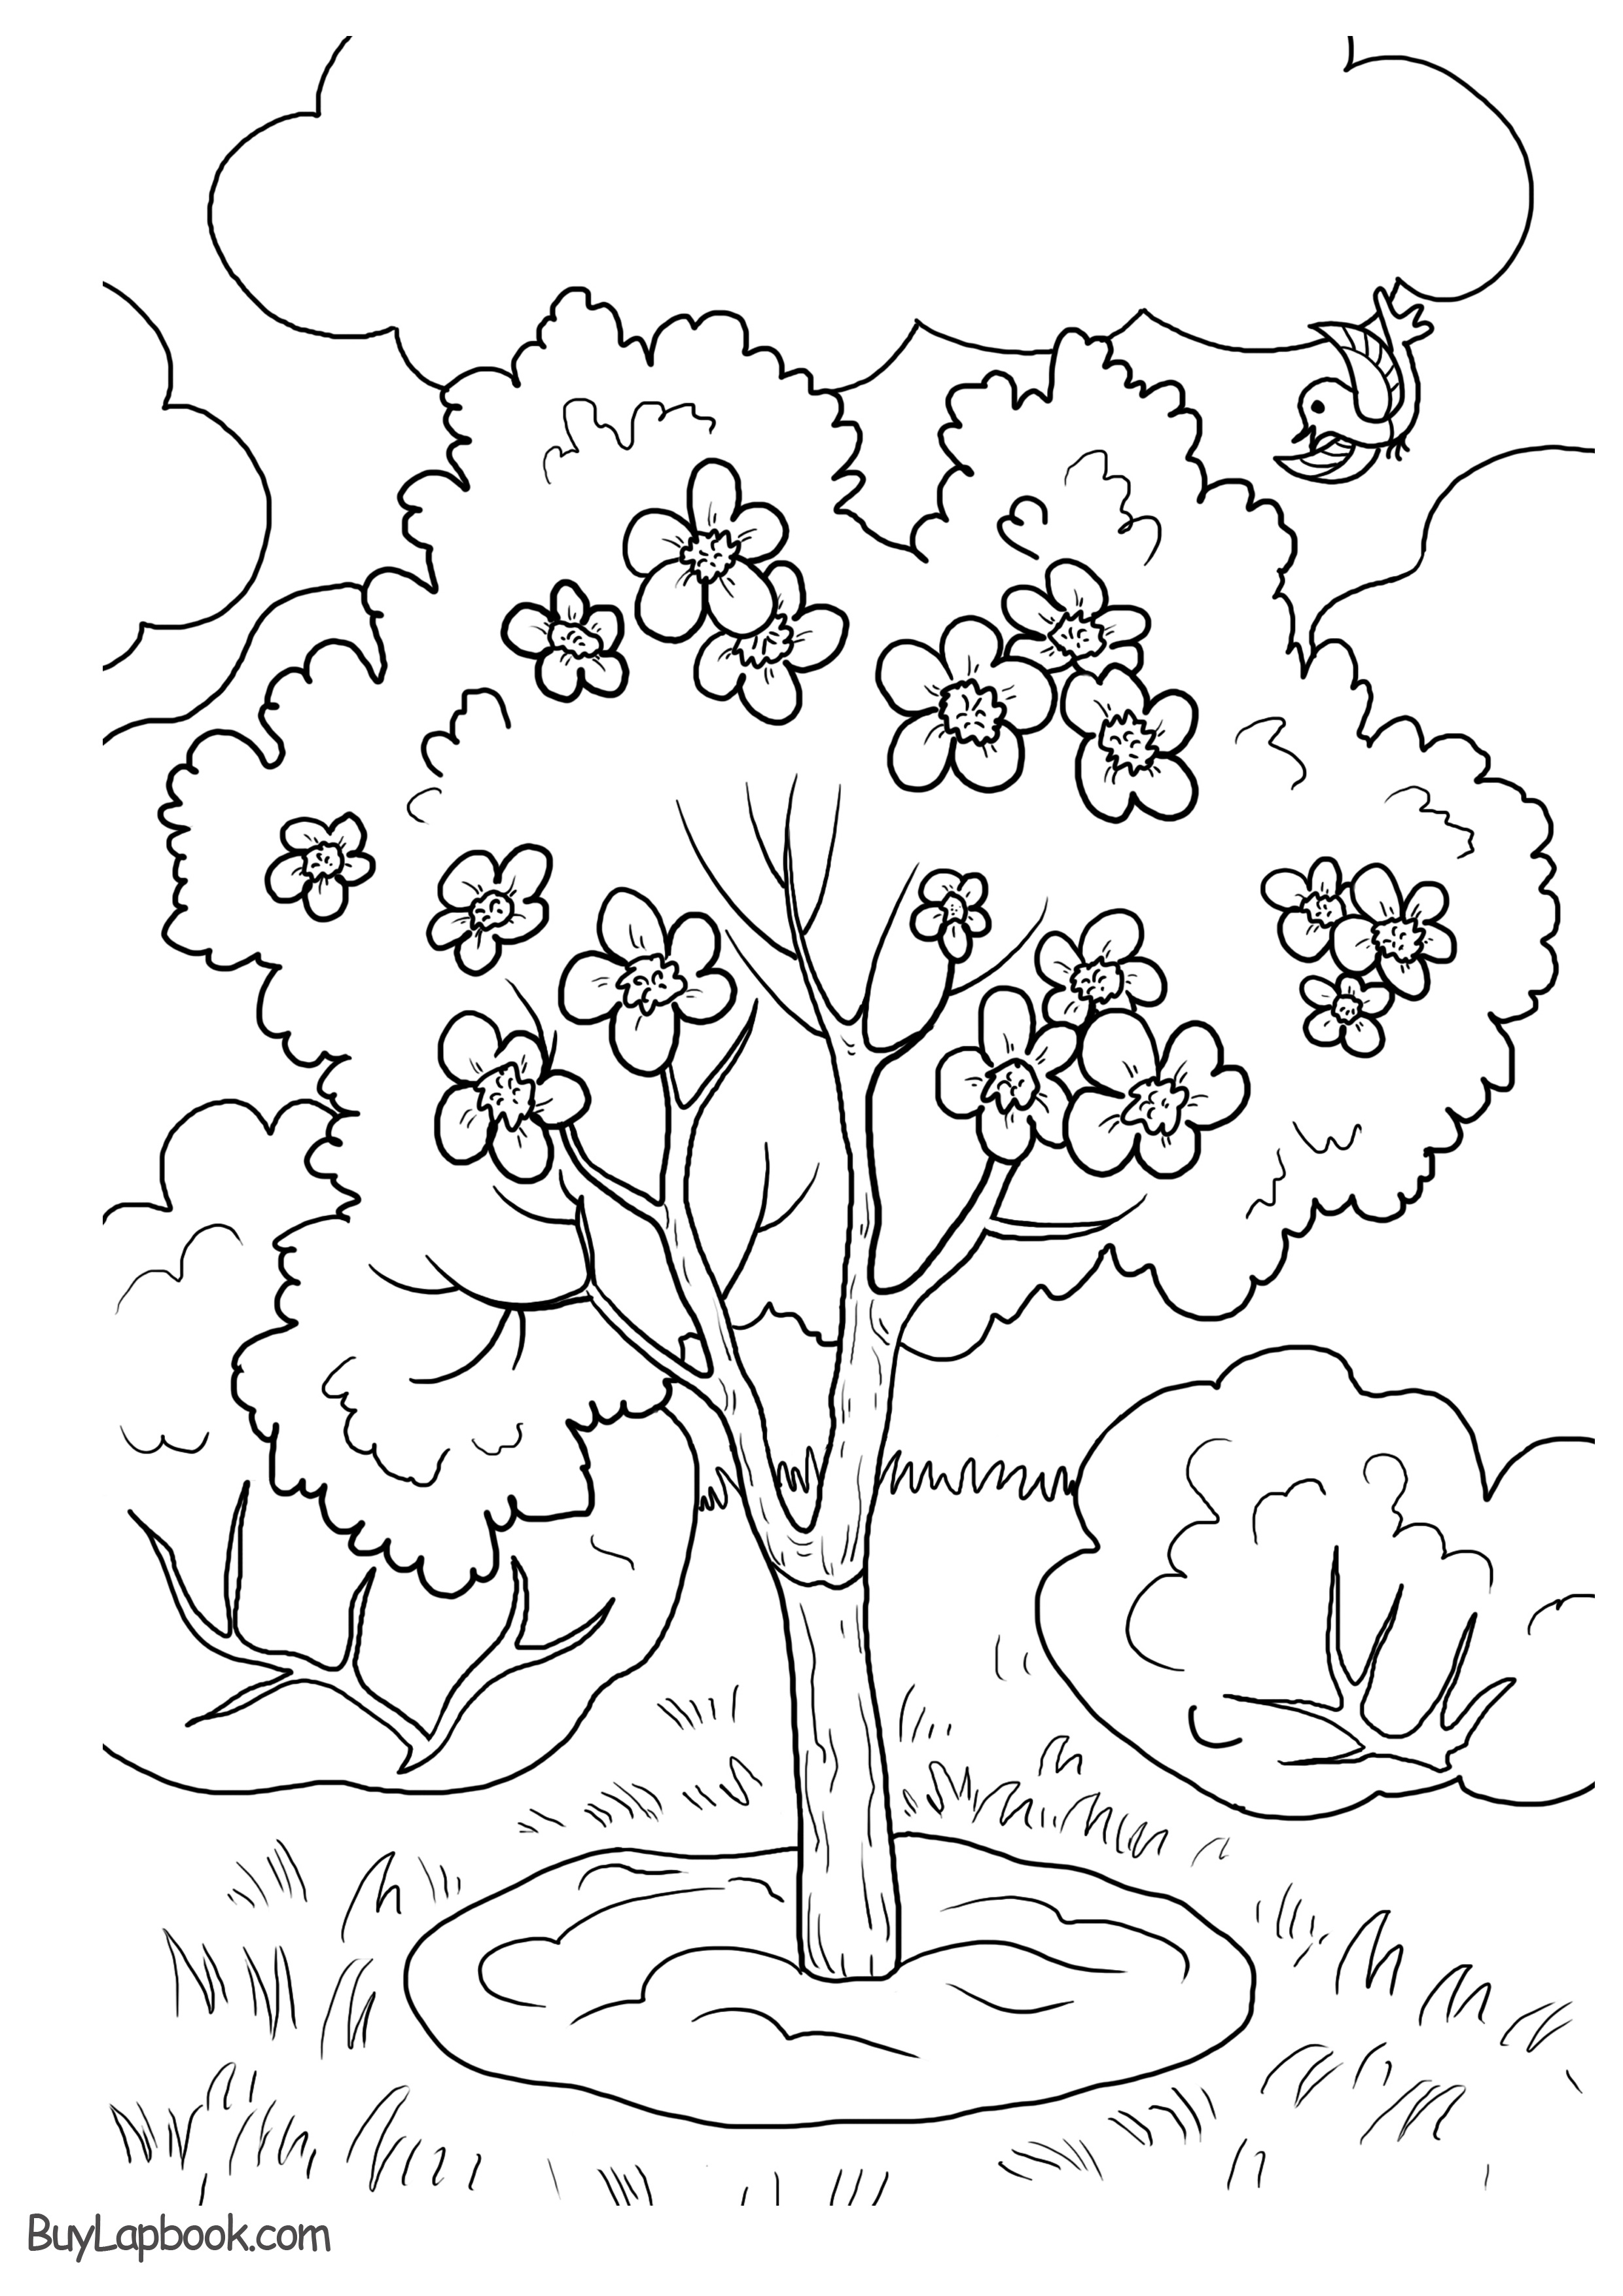 Apple Tree Apple Life Cycle Coloring Pages Teachersmag Com Coloring Home